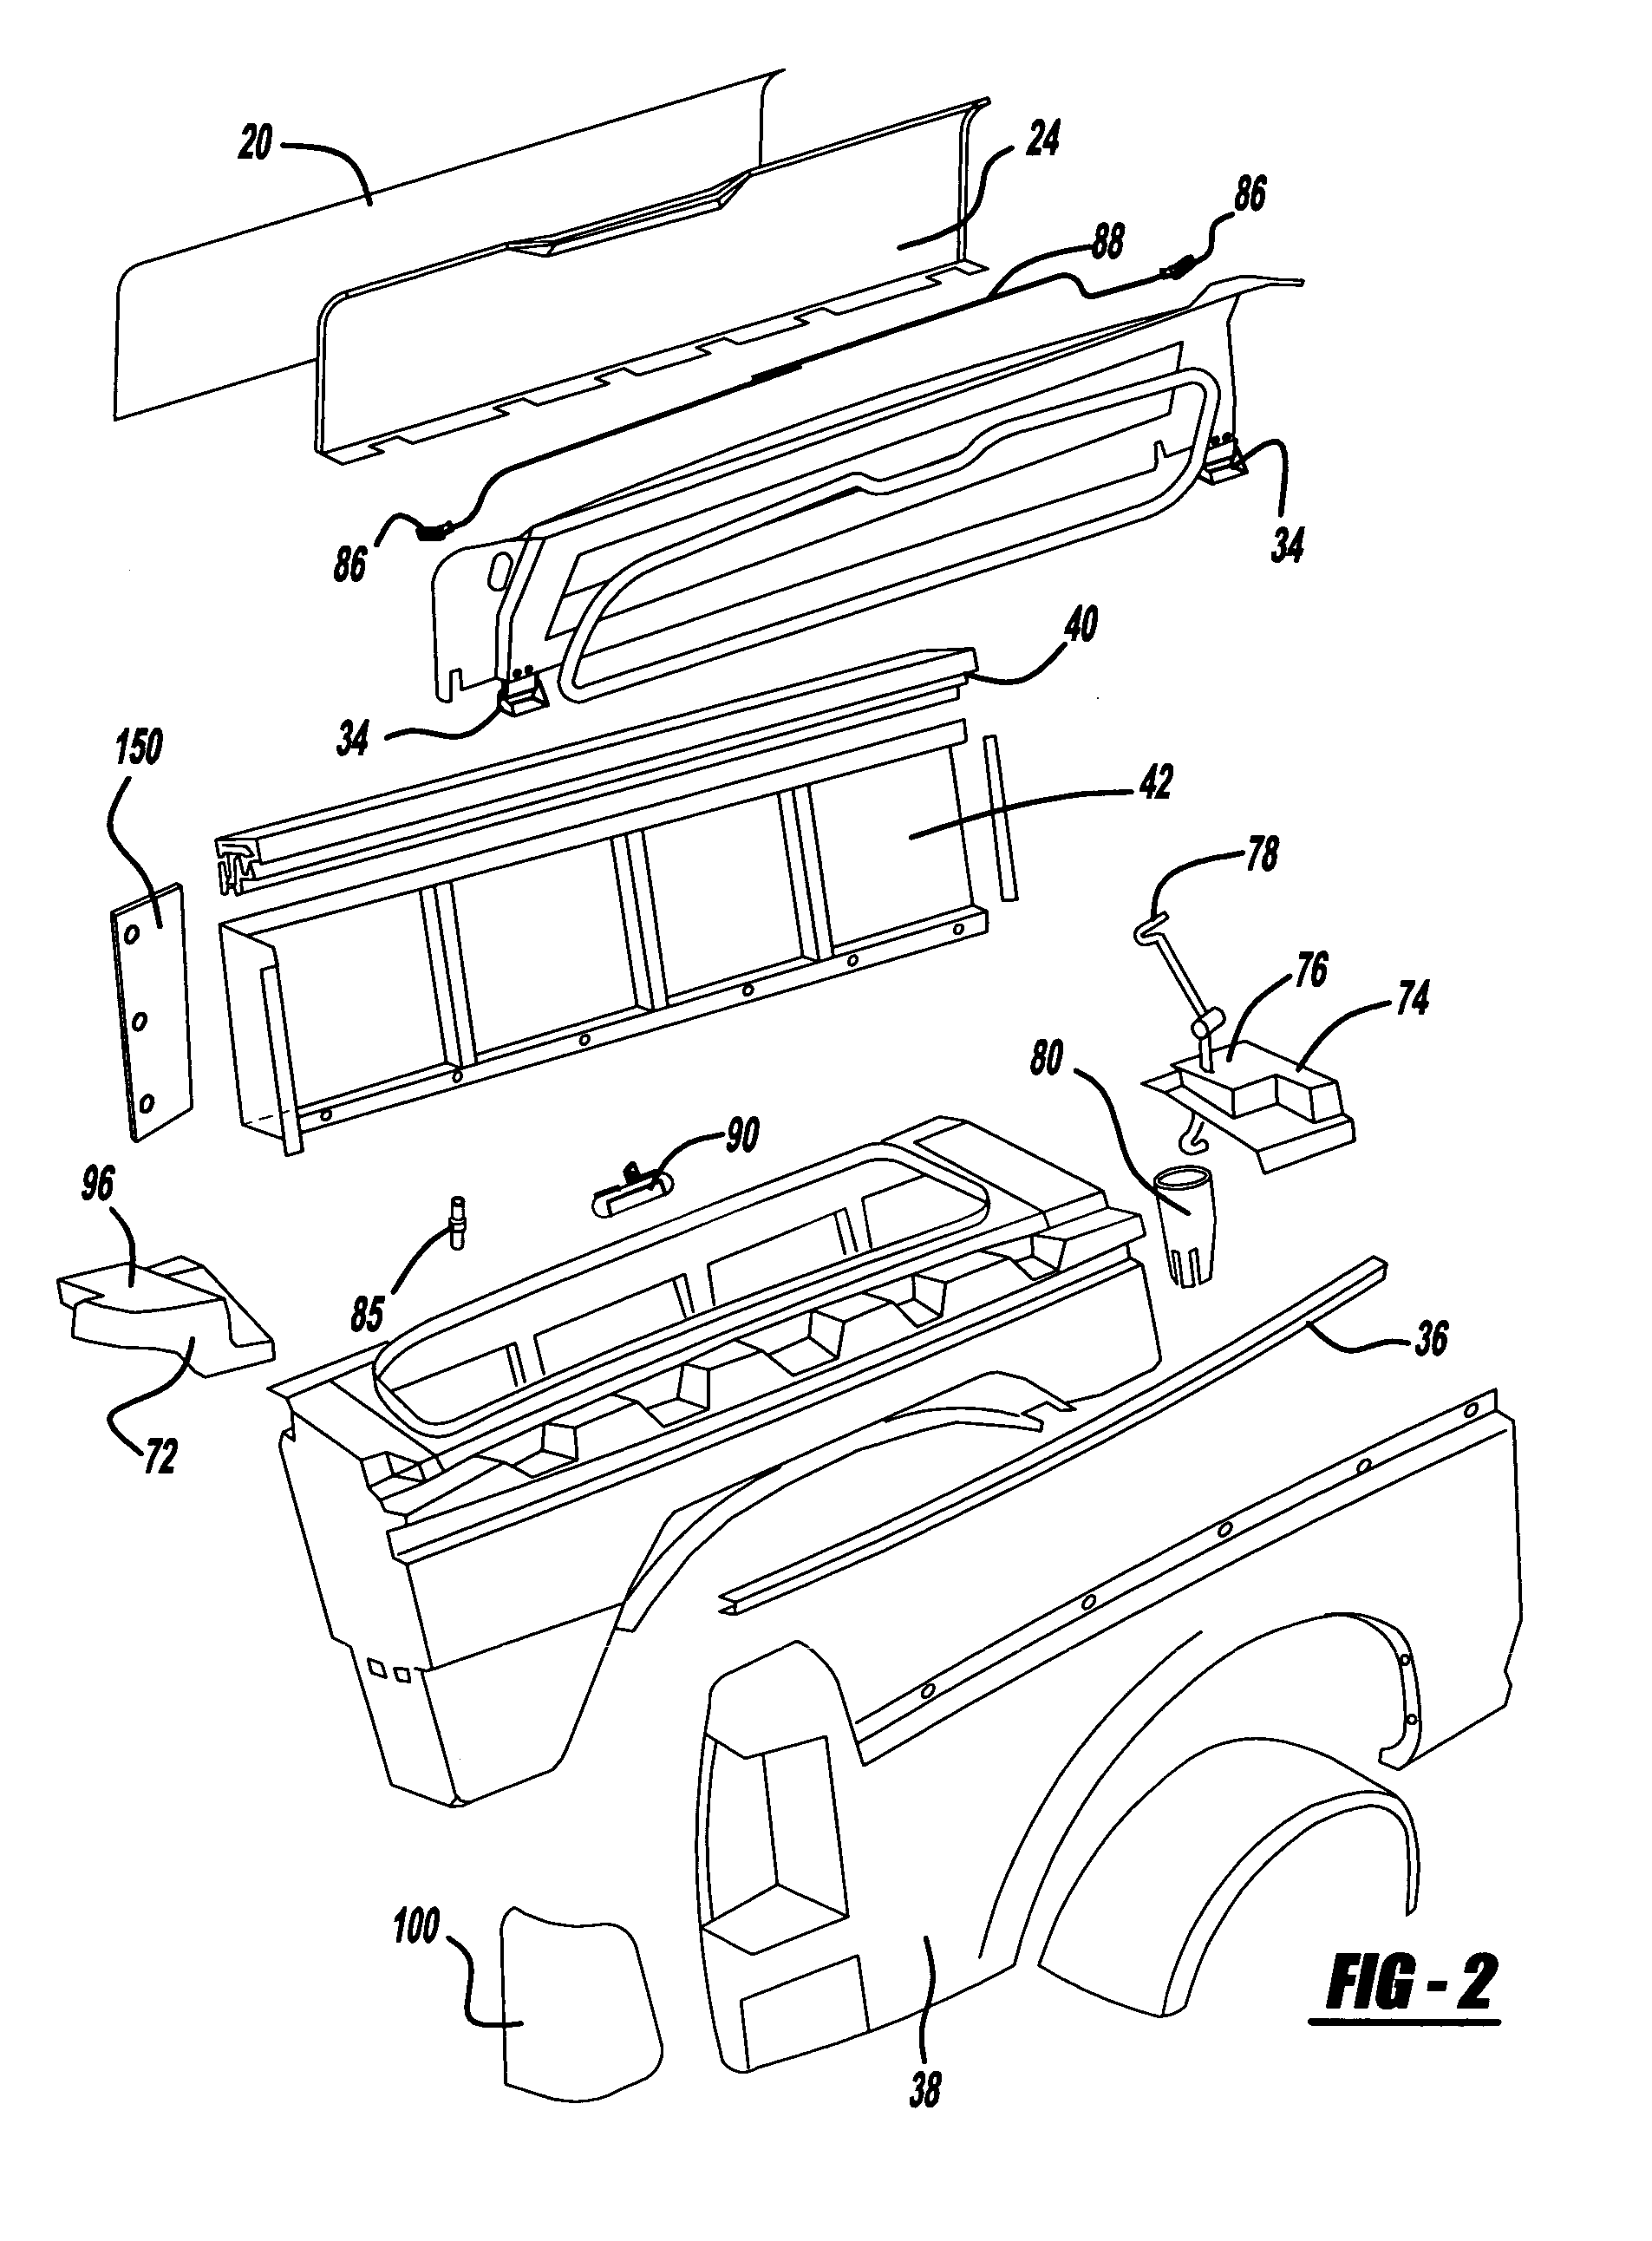 Vehicle side article transporter device